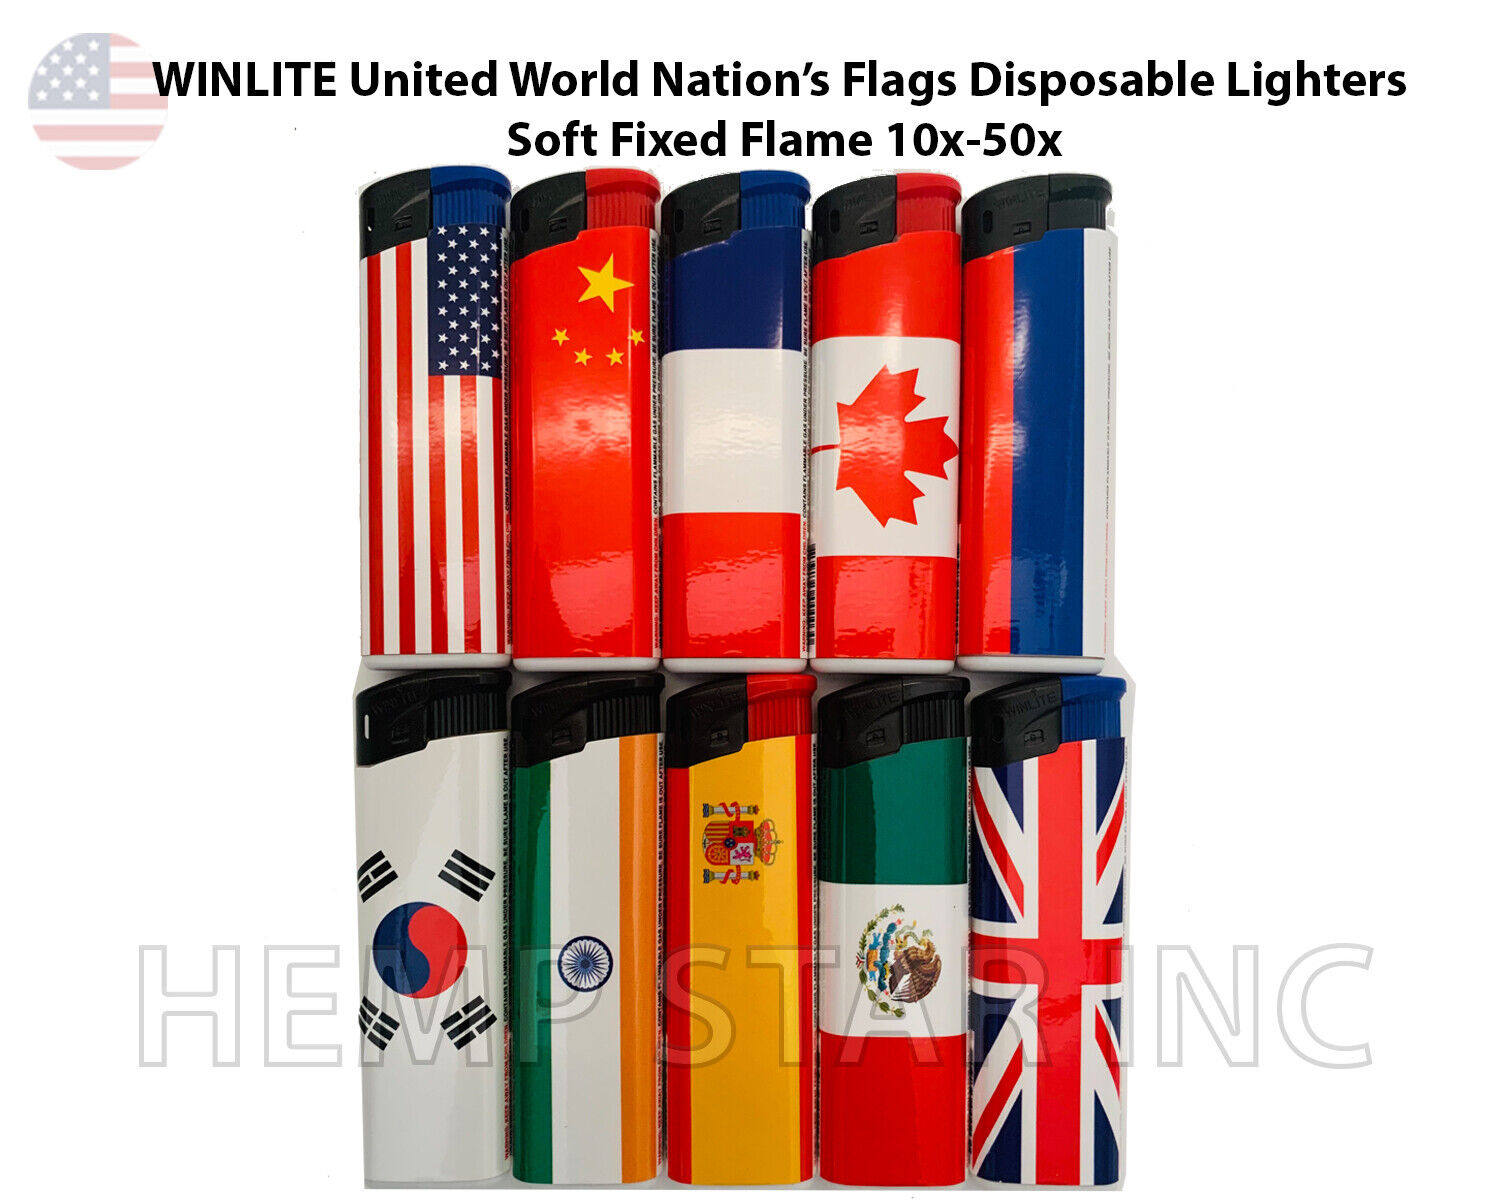 WINLITE United World Nation’s Flags Disposable Lighters Soft Fixed Flame 10x-50x